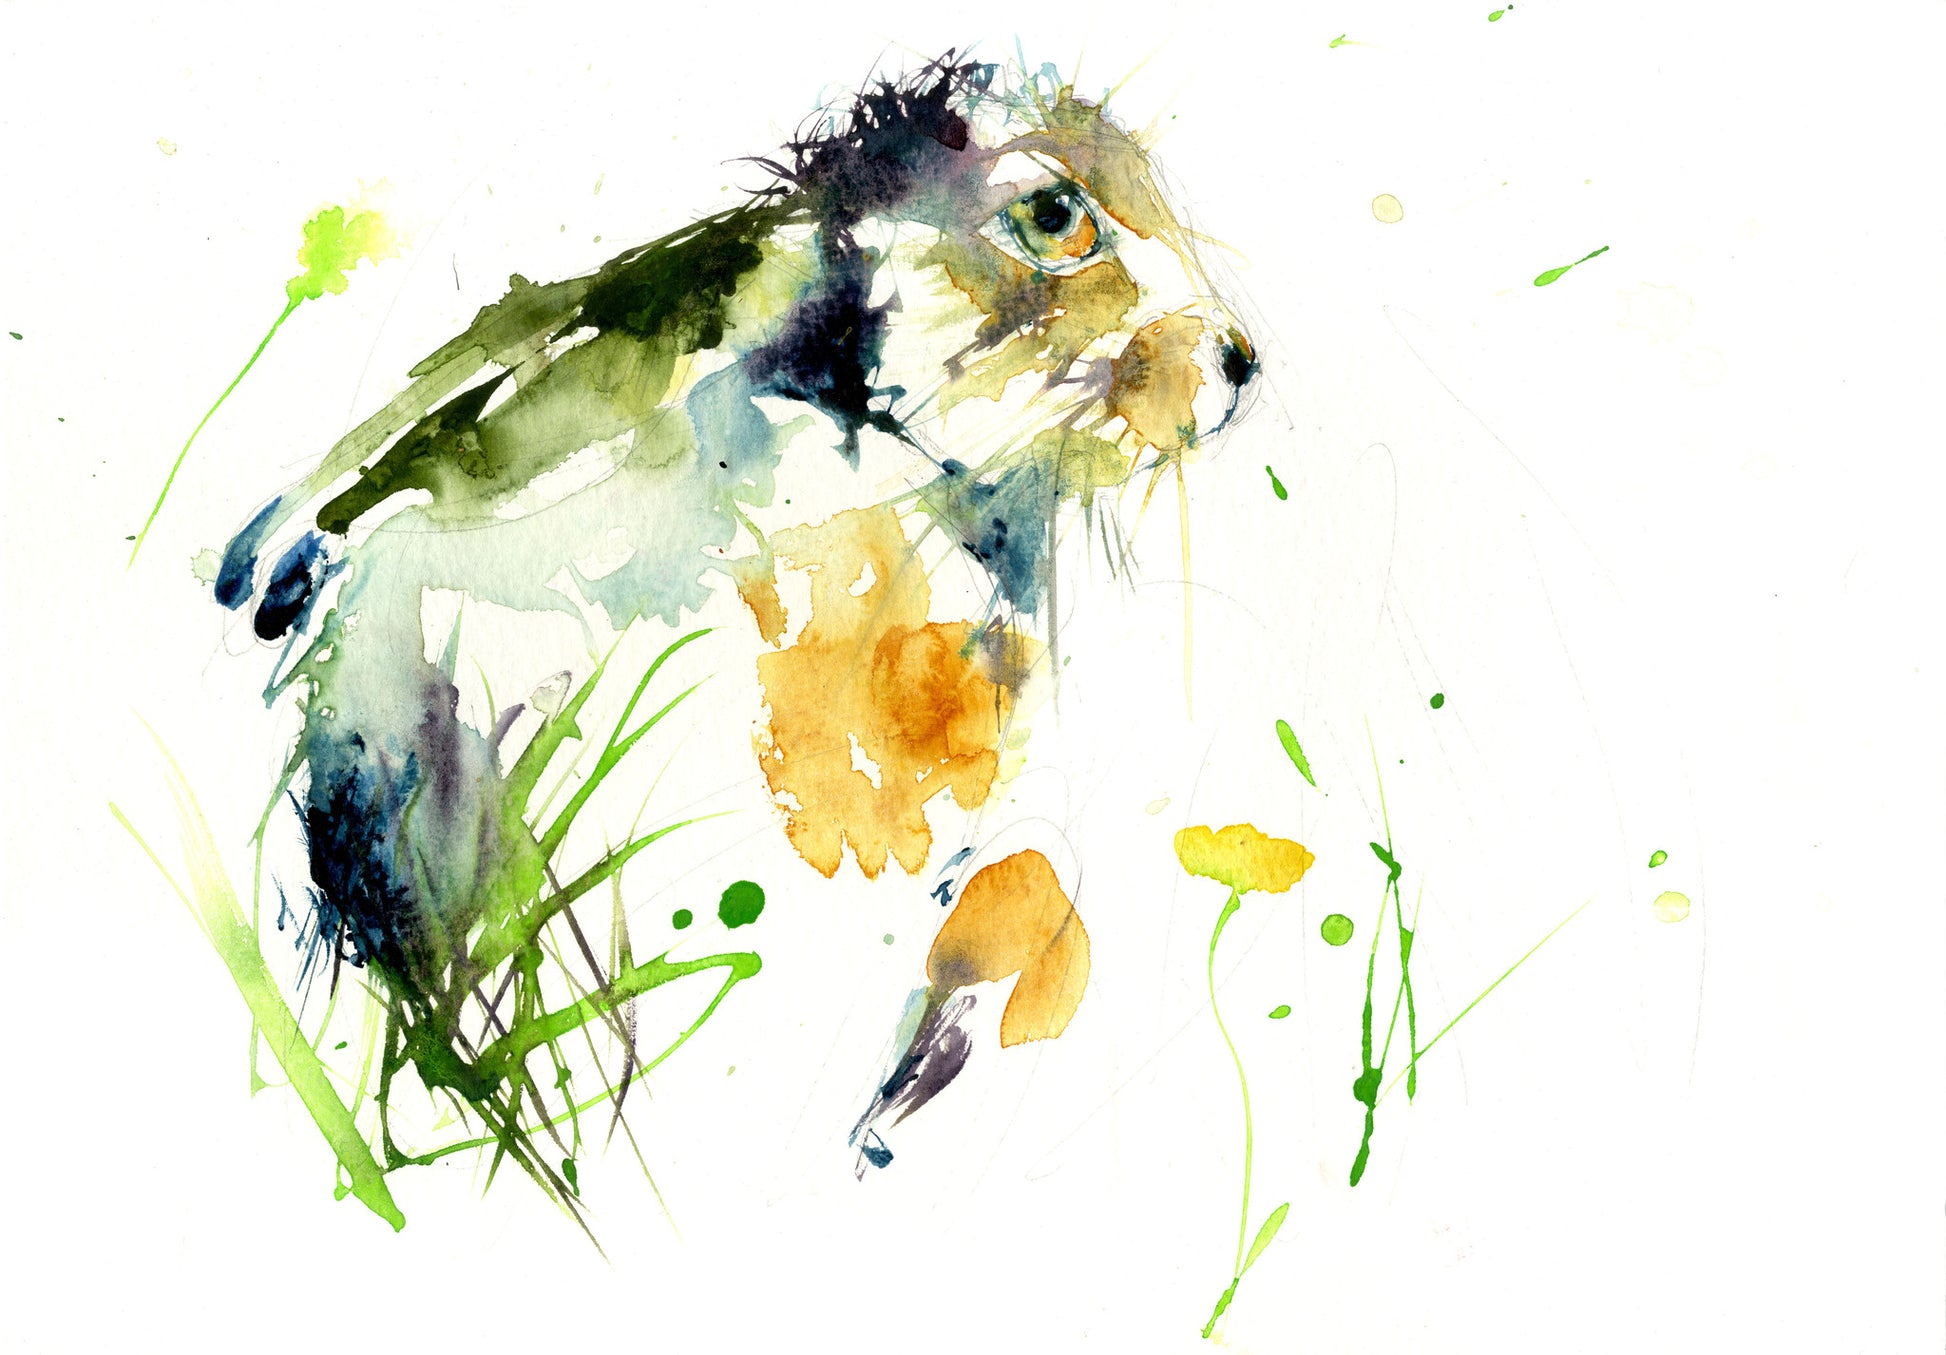 limited edition PRINT of my original HARE watercolour - Jen Buckley Art limited edition animal art prints